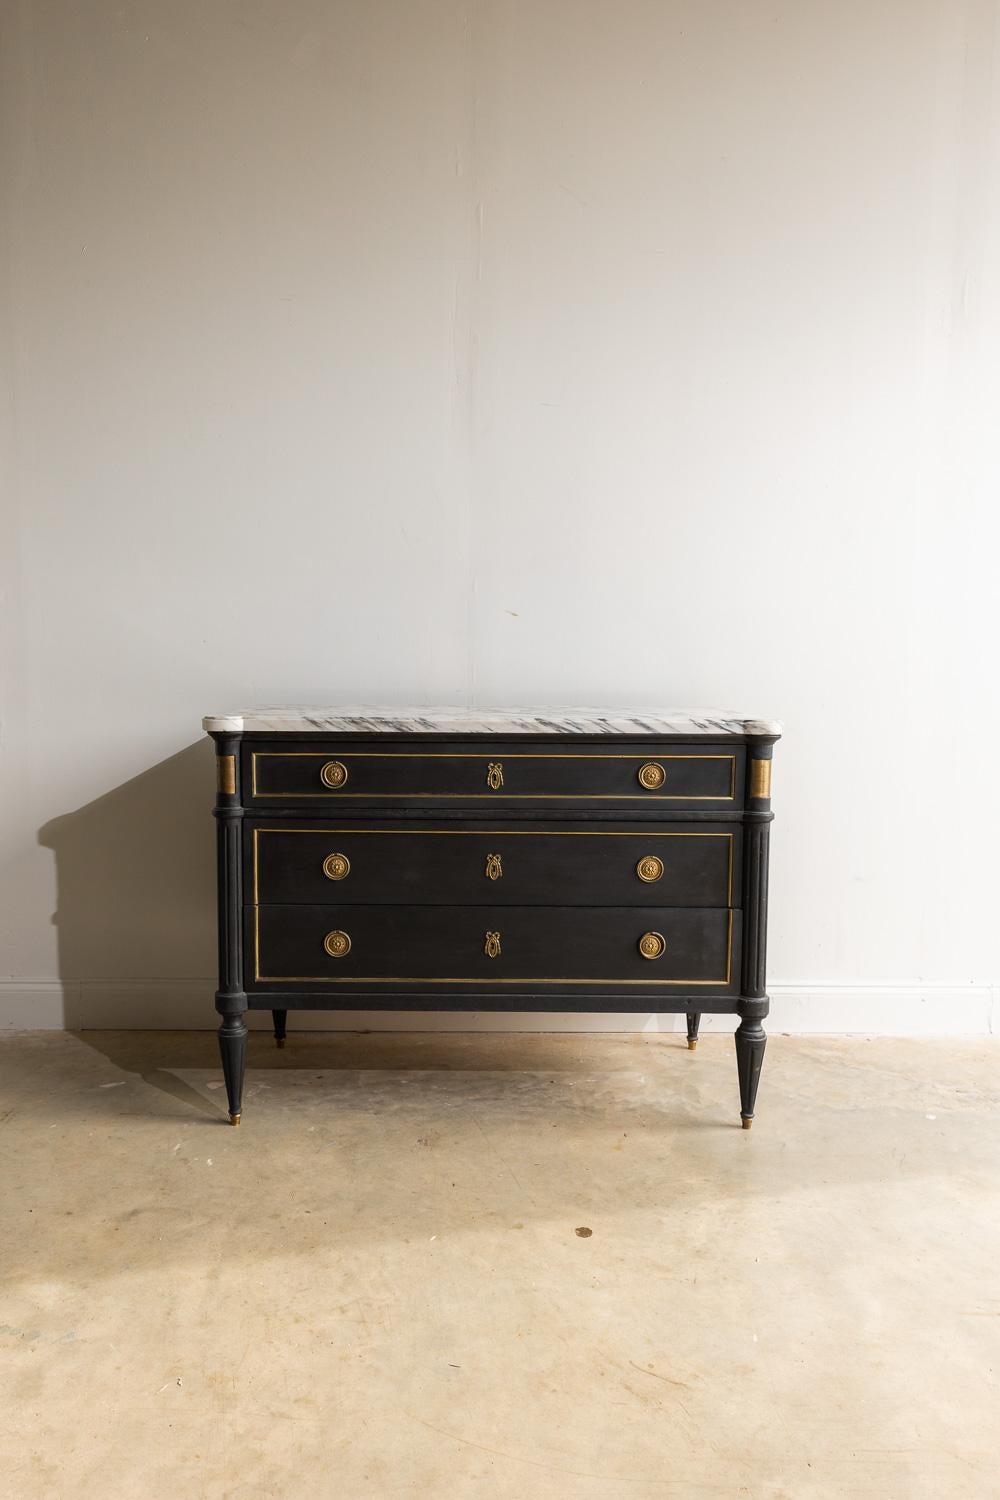 This piece is truly a sight to behold! The moody marble top, black paint, and gold accents give this piece such a unique feel. All of the original hardware is a beautiful worn gold color. There are 3 large working drawers. The top drawer has a